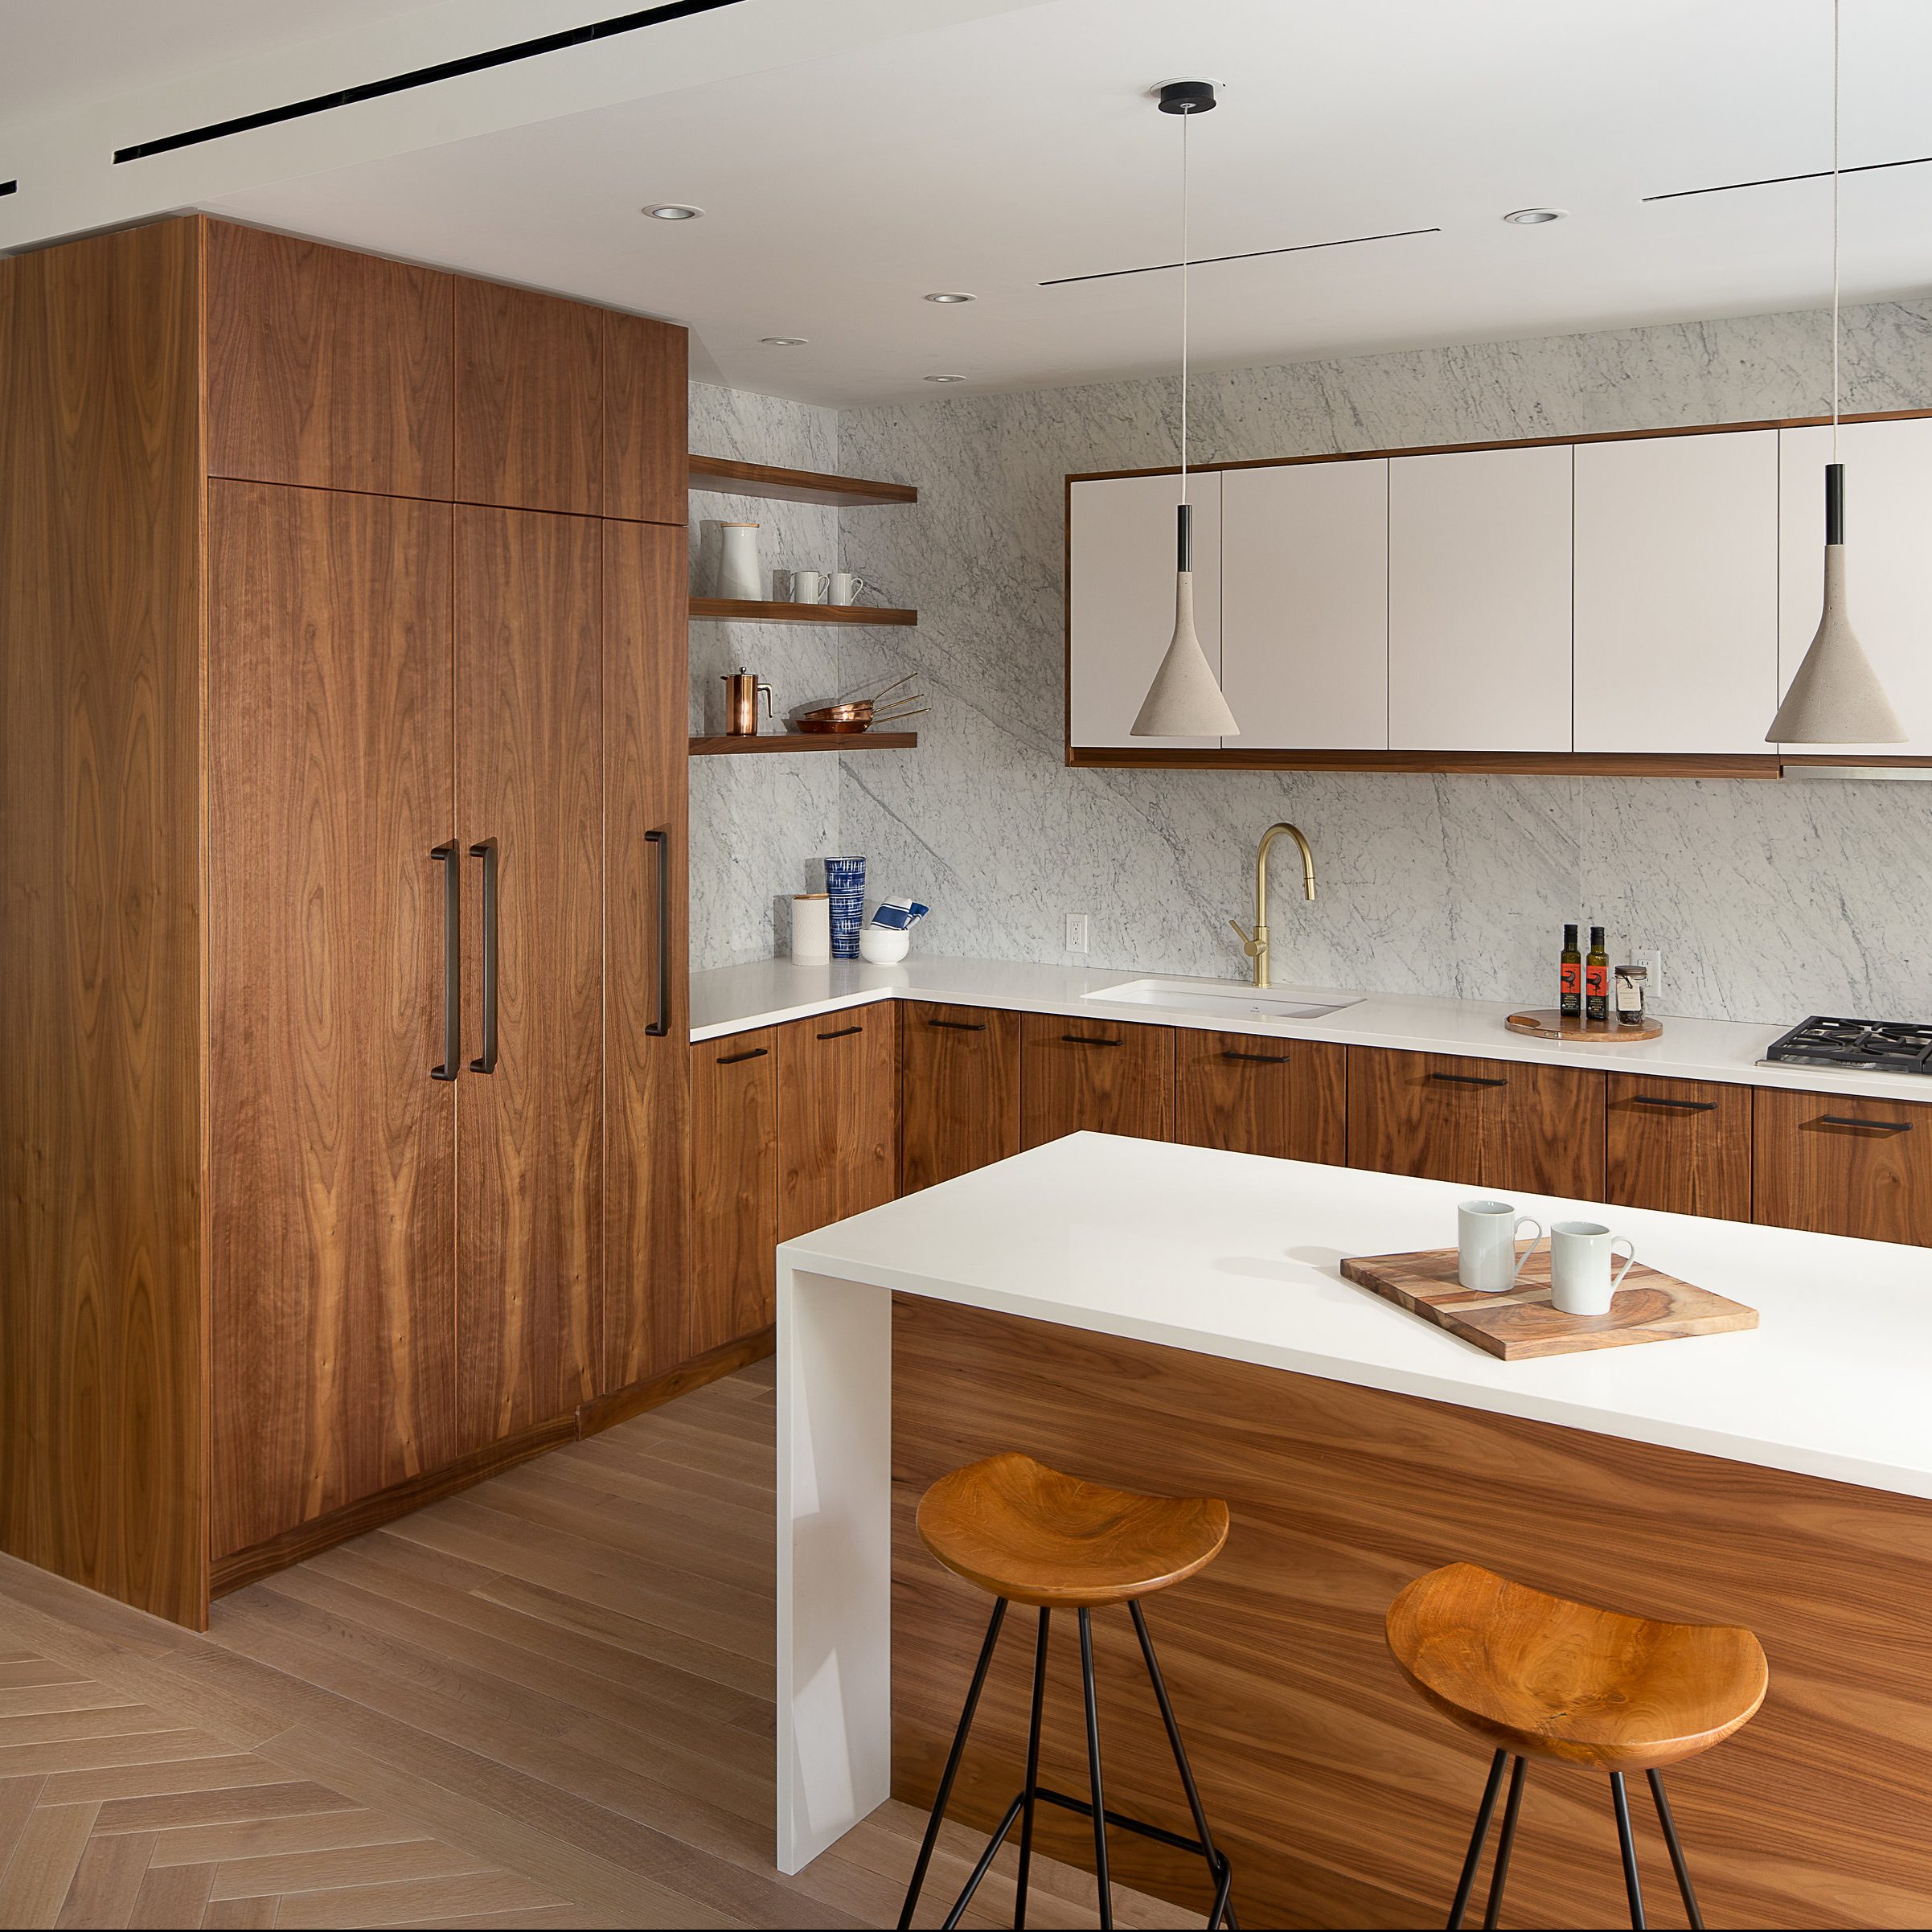 Modern kitchen with wooden cabinets, white countertops, hanging pendant lights, and bar stools by an island, ideal for home remodeling.